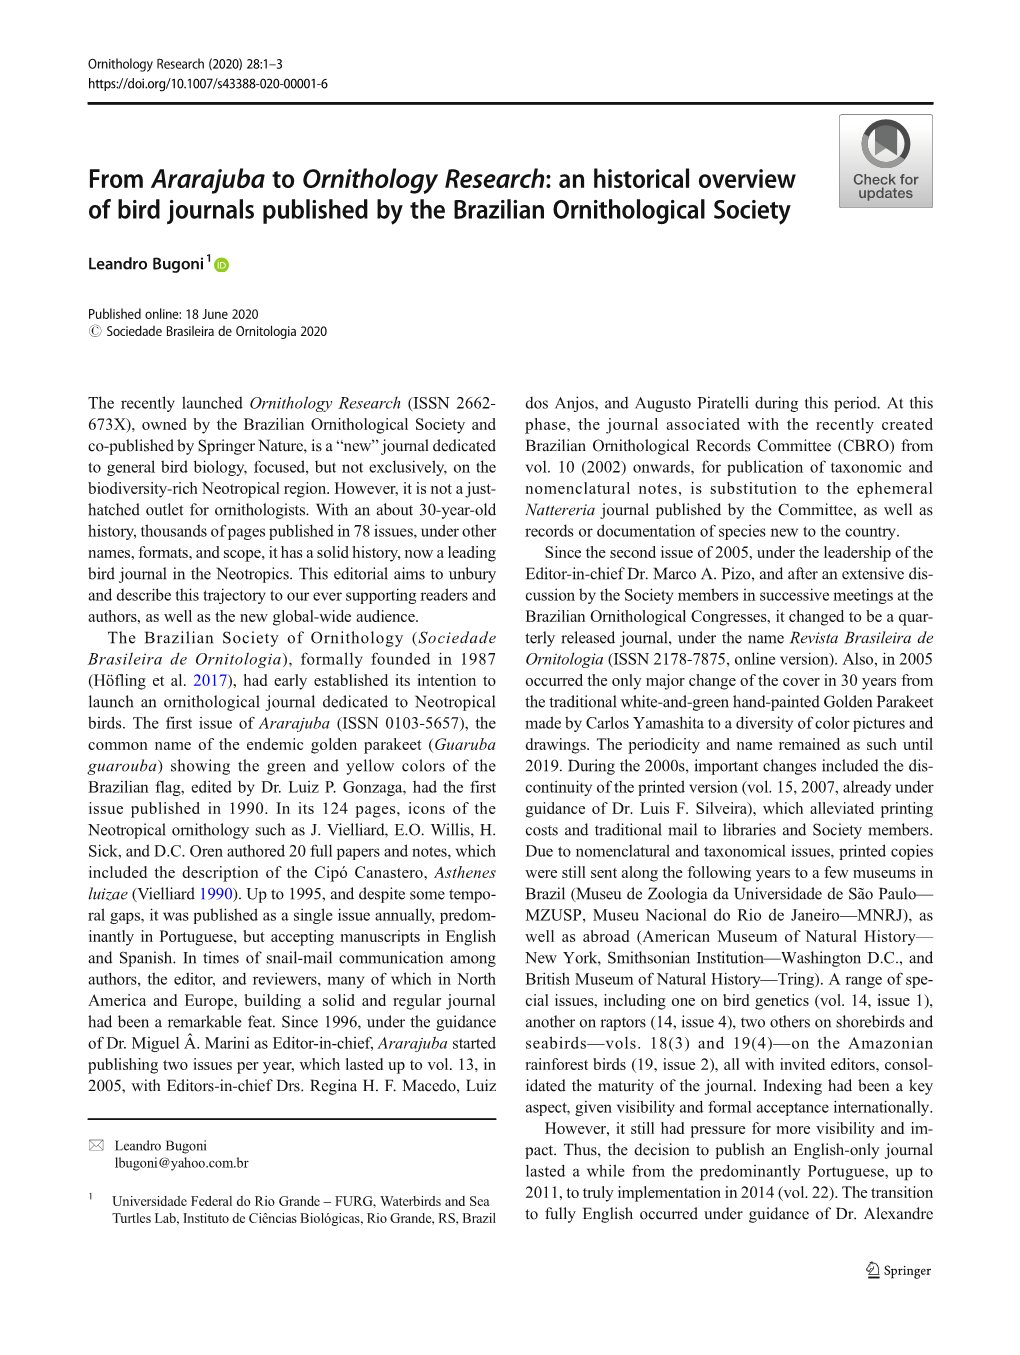 An Historical Overview of Bird Journals Published by the Brazilian Ornithological Society